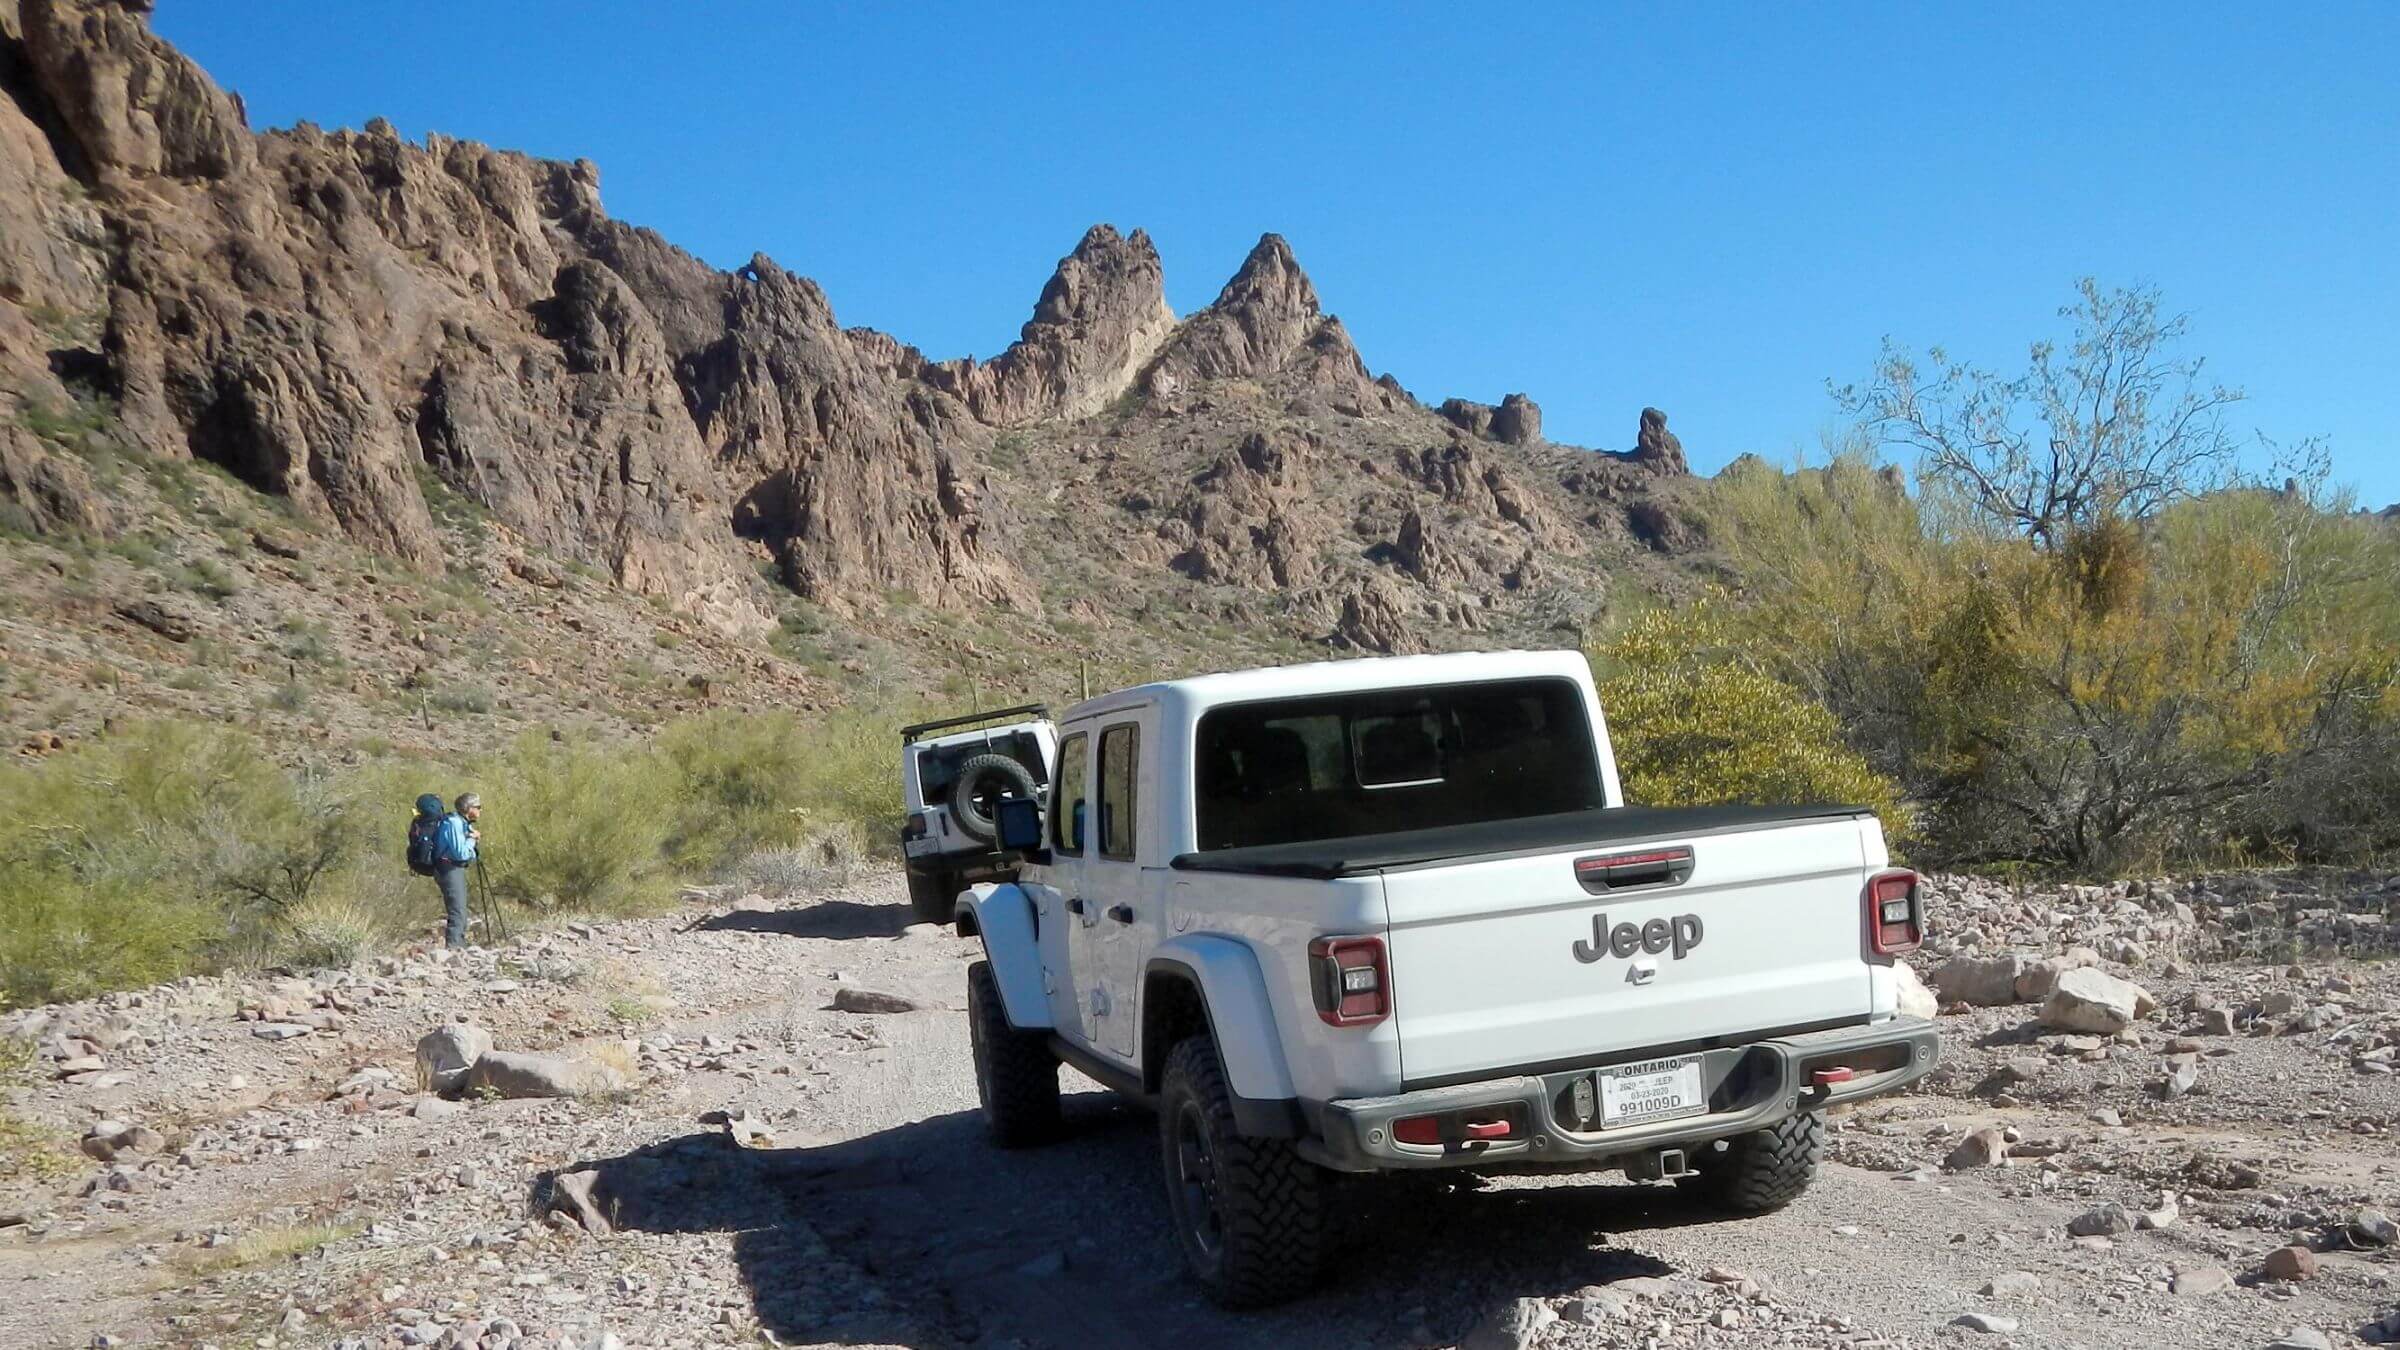 Kofa Wilderness backpacking, vehicles share Queen Canyon Road, January